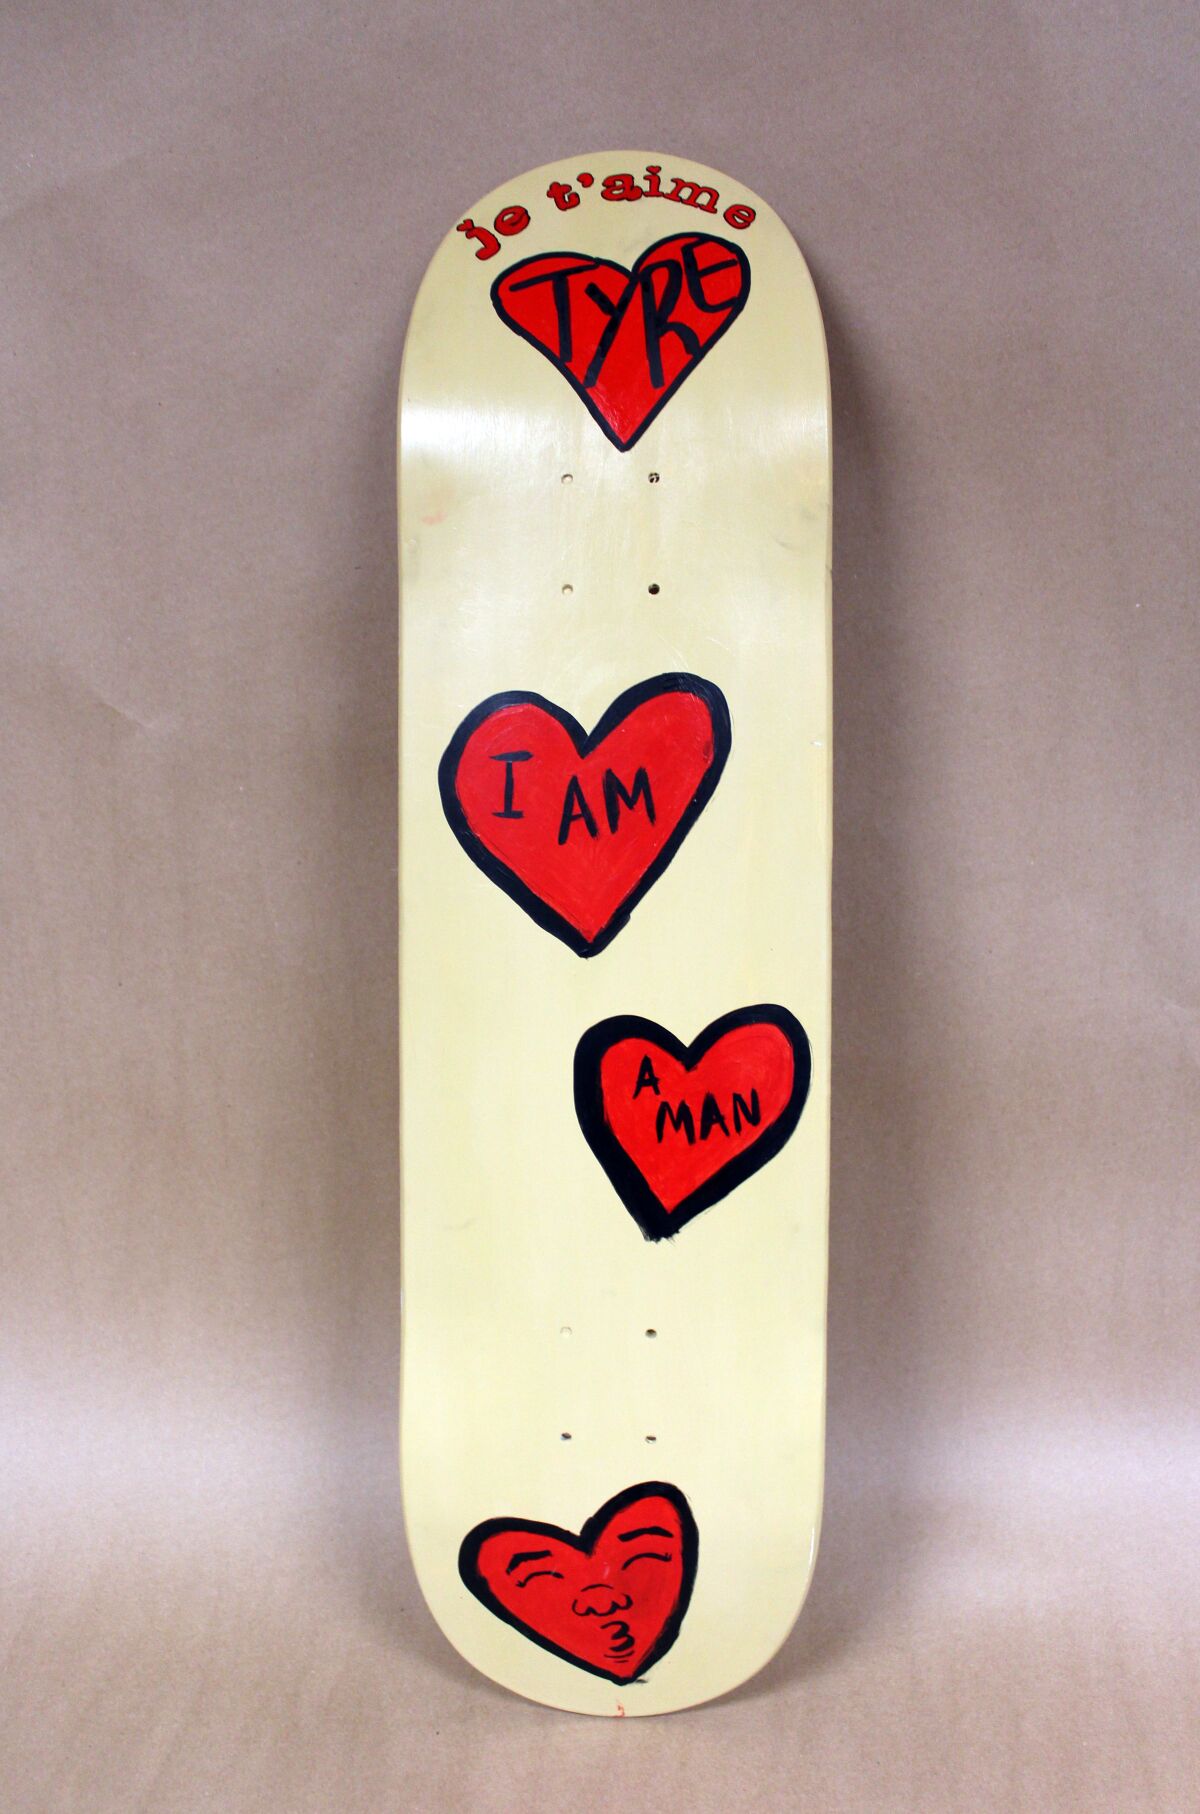 A skateboard with red hearts reads "je t'aime Tyre" and "I am a man."